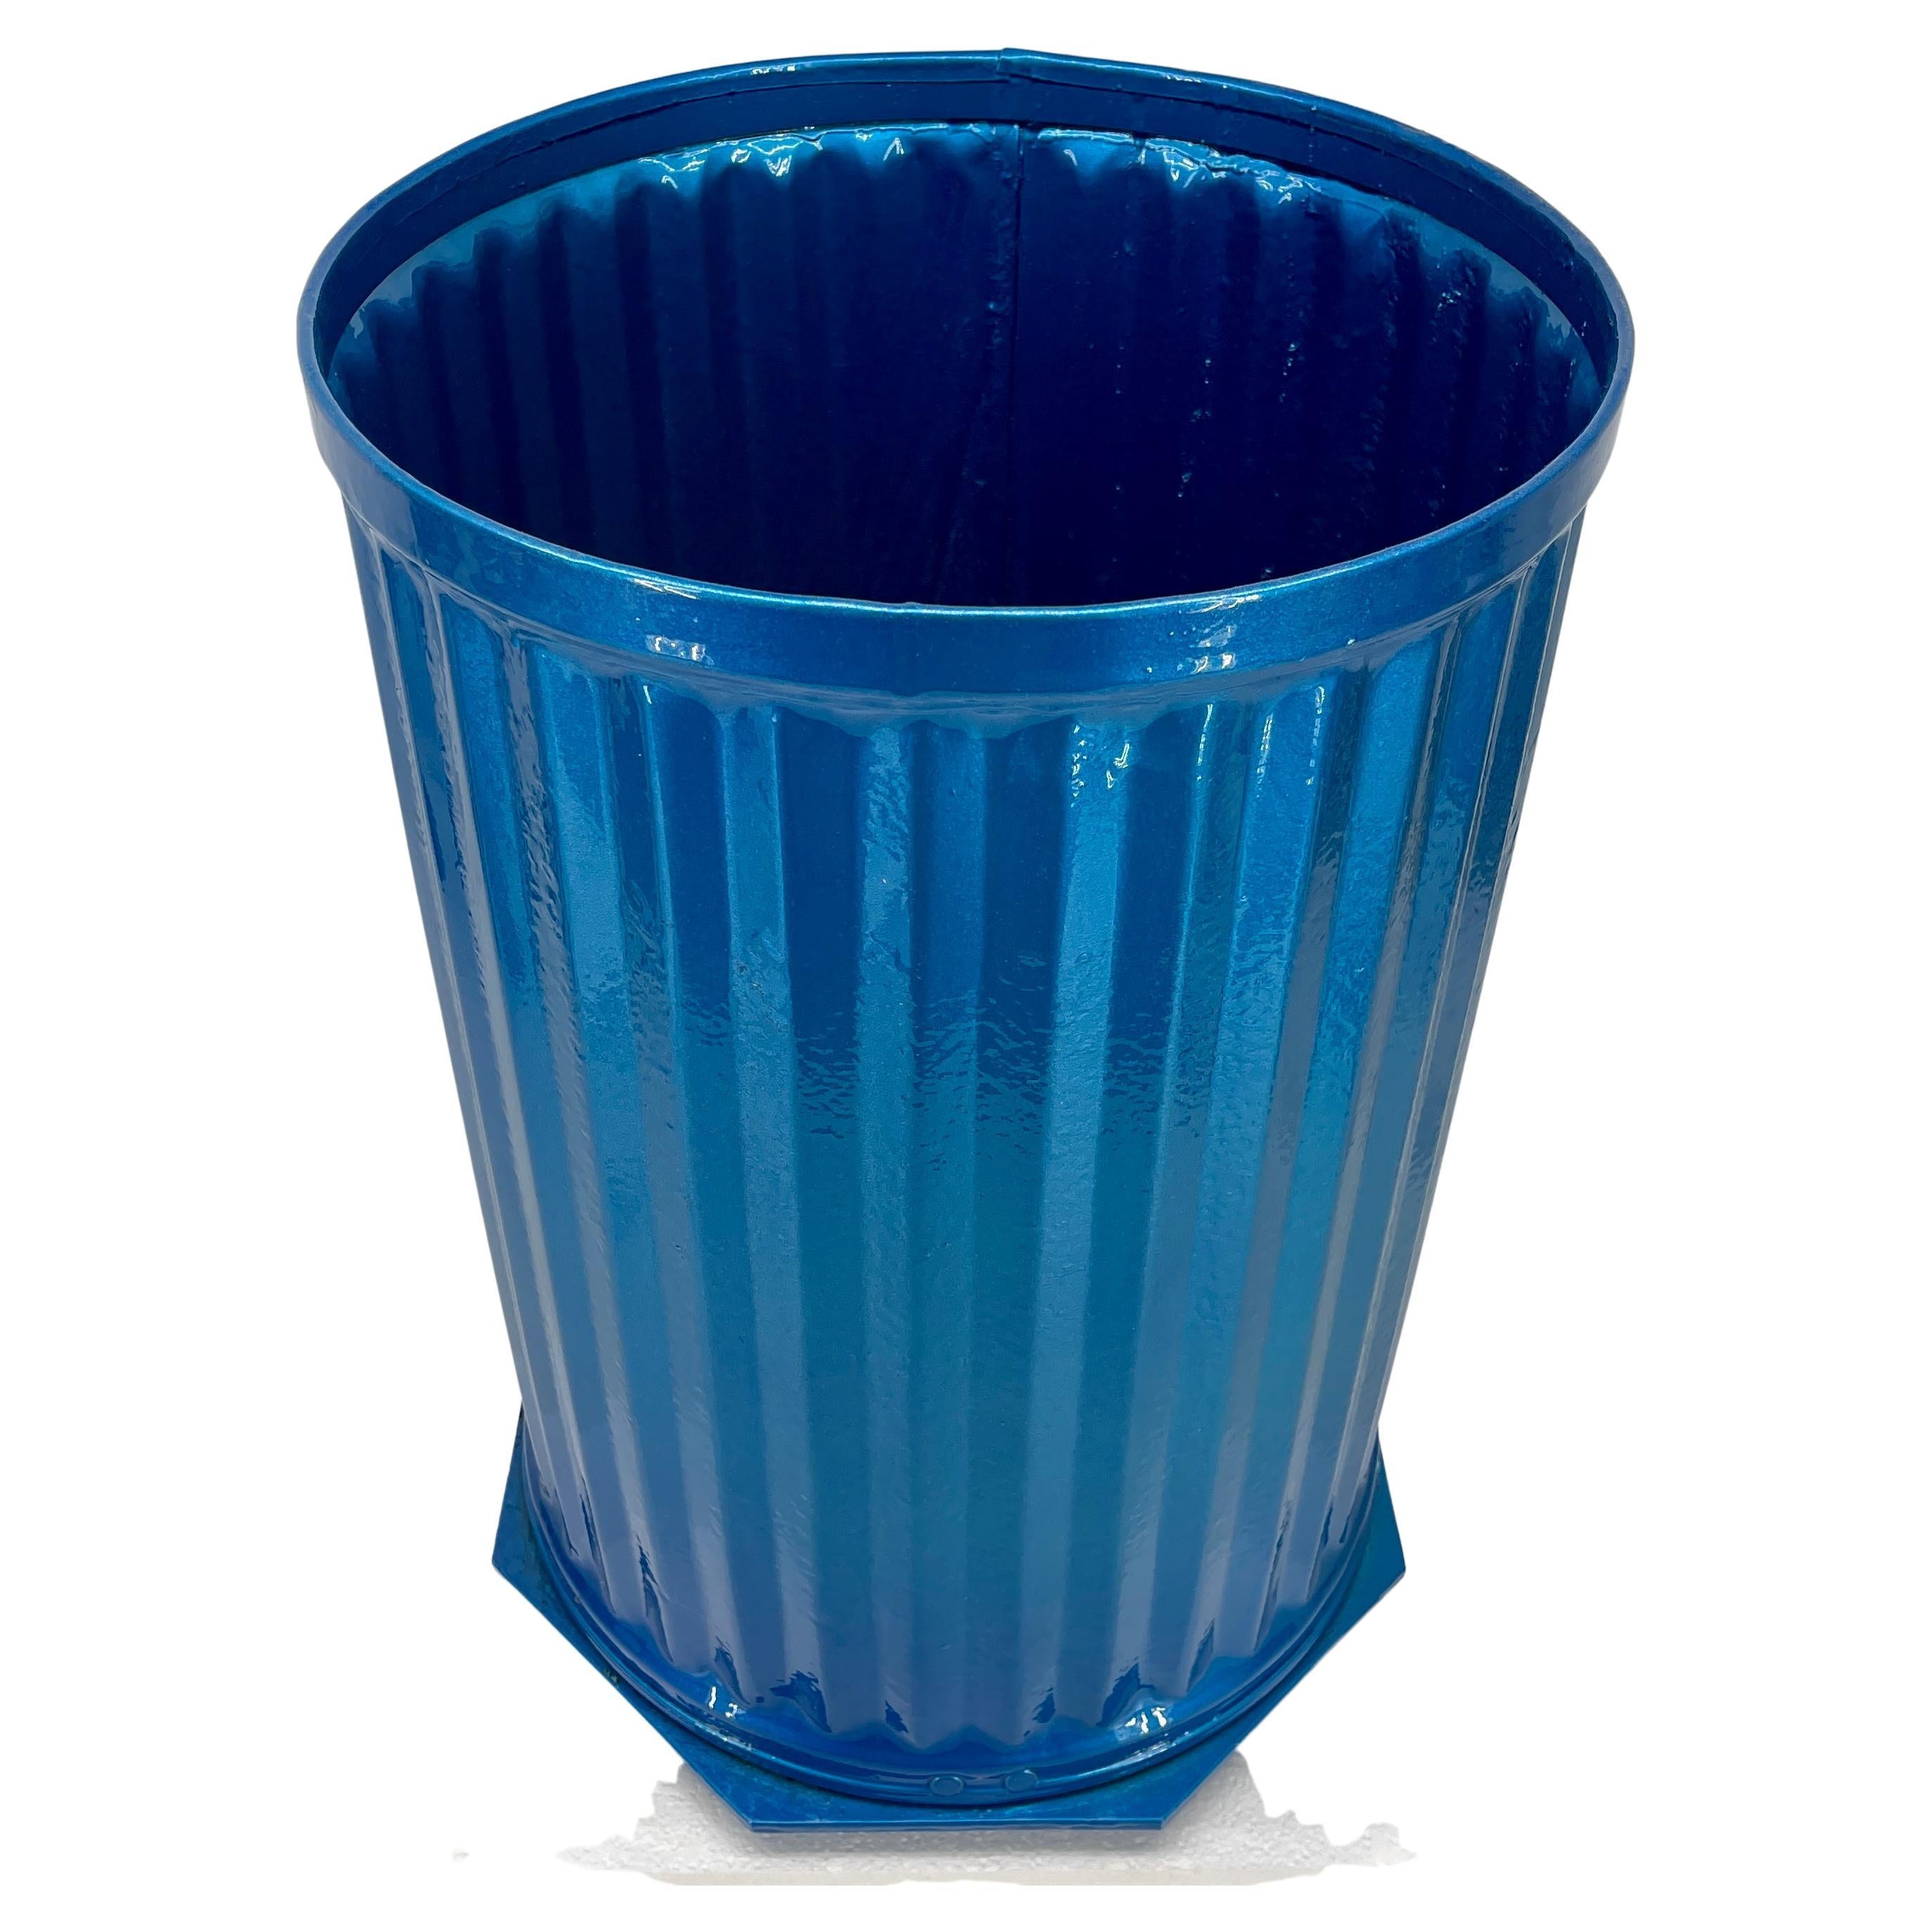 Industrial metal trash can, bin or umbrella stand.

We can offer these bins powder coated in any color at buyers request.

Freshly powder coated in bright Maui blue, this tall and sturdy bin has strong fluting detail all around and solid base.